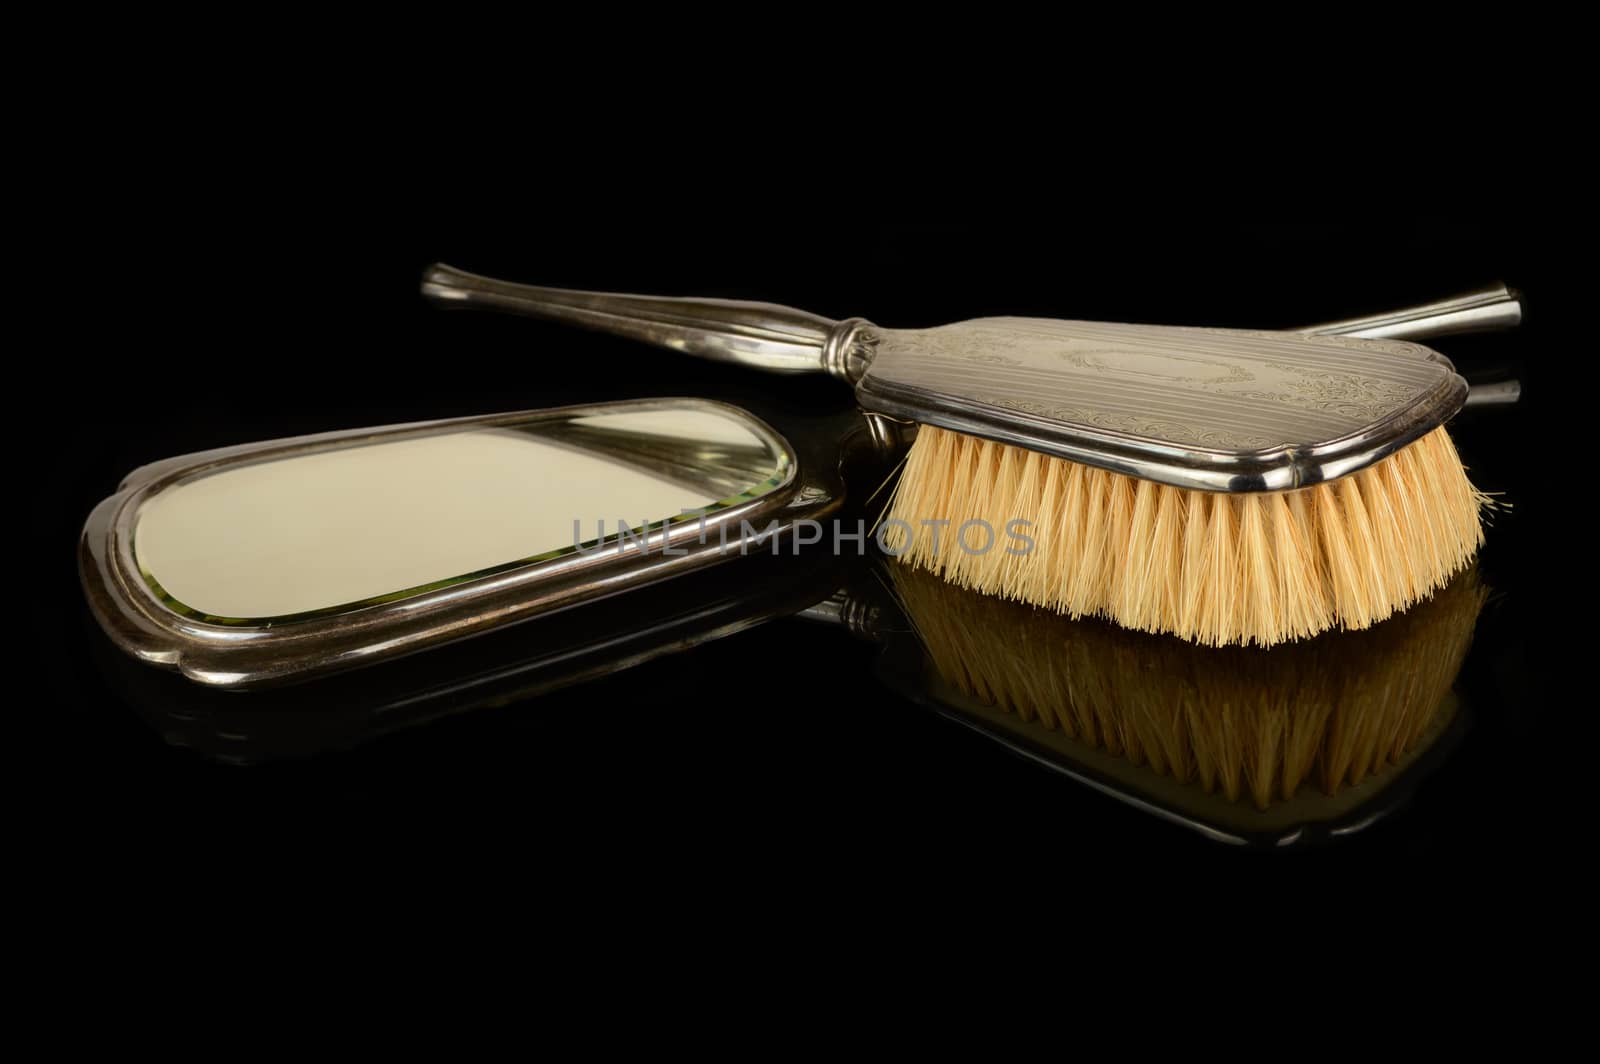 A vintage set of a handheld sterling silver mirror and hair brush isolated over a black reflective surface.